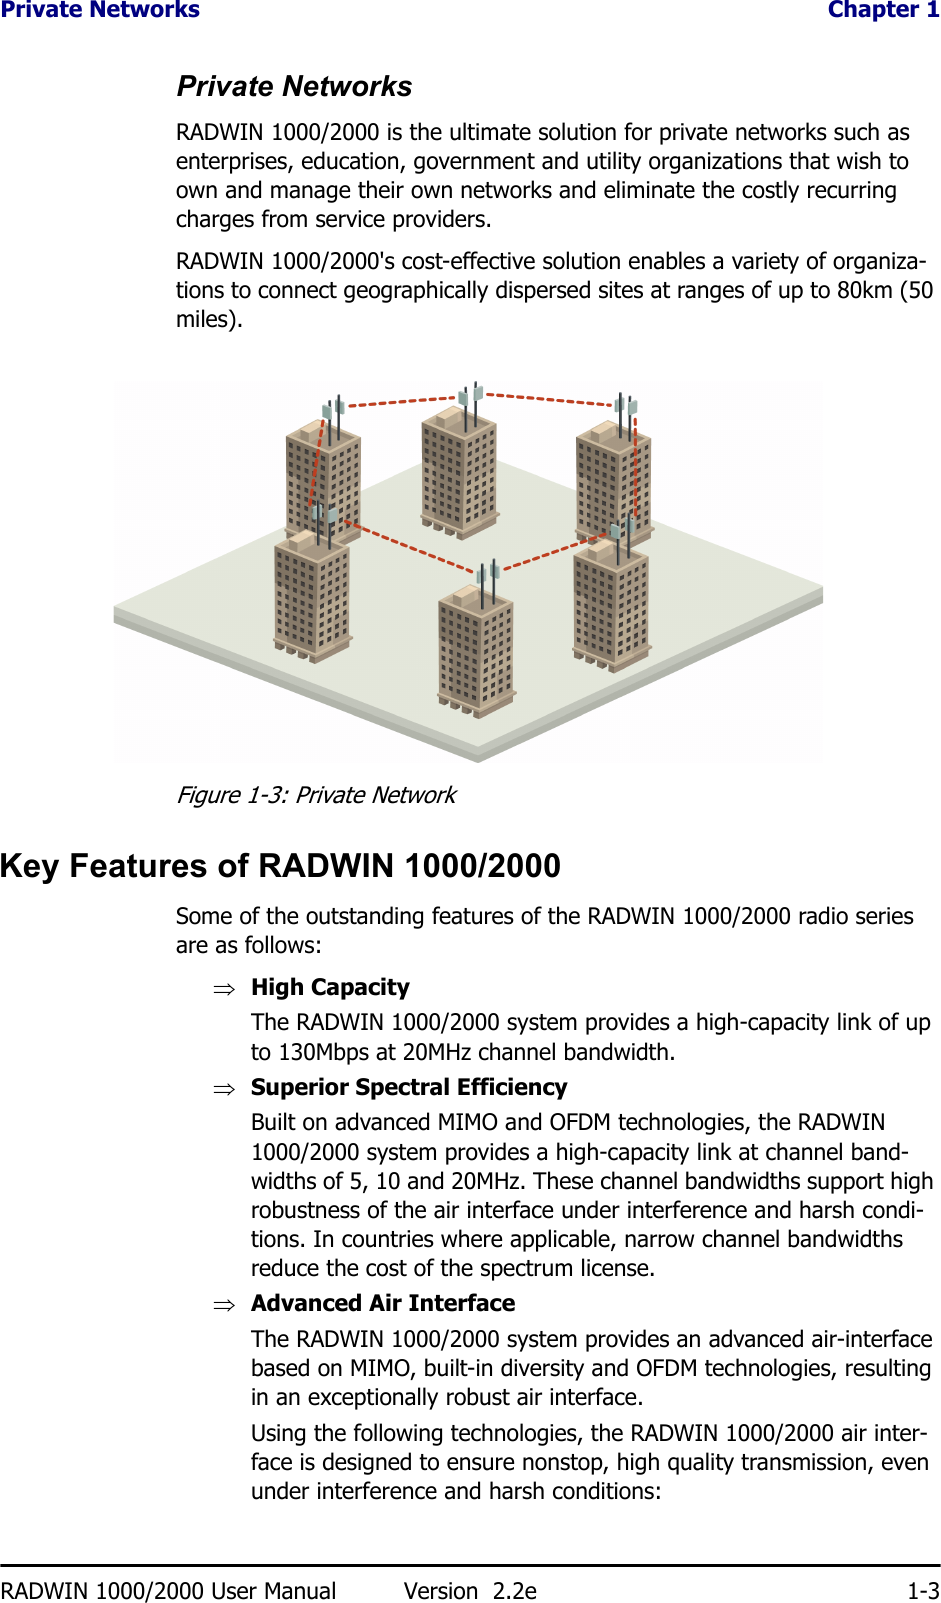 Private Networks  Chapter 1RADWIN 1000/2000 User Manual Version  2.2e 1-3Private NetworksRADWIN 1000/2000 is the ultimate solution for private networks such as enterprises, education, government and utility organizations that wish to own and manage their own networks and eliminate the costly recurring charges from service providers.RADWIN 1000/2000&apos;s cost-effective solution enables a variety of organiza-tions to connect geographically dispersed sites at ranges of up to 80km (50 miles).Figure 1-3: Private NetworkKey Features of RADWIN 1000/2000Some of the outstanding features of the RADWIN 1000/2000 radio series are as follows:⇒High CapacityThe RADWIN 1000/2000 system provides a high-capacity link of up to 130Mbps at 20MHz channel bandwidth.⇒Superior Spectral EfficiencyBuilt on advanced MIMO and OFDM technologies, the RADWIN 1000/2000 system provides a high-capacity link at channel band-widths of 5, 10 and 20MHz. These channel bandwidths support high robustness of the air interface under interference and harsh condi-tions. In countries where applicable, narrow channel bandwidths reduce the cost of the spectrum license.⇒Advanced Air InterfaceThe RADWIN 1000/2000 system provides an advanced air-interface based on MIMO, built-in diversity and OFDM technologies, resulting in an exceptionally robust air interface. Using the following technologies, the RADWIN 1000/2000 air inter-face is designed to ensure nonstop, high quality transmission, even under interference and harsh conditions: